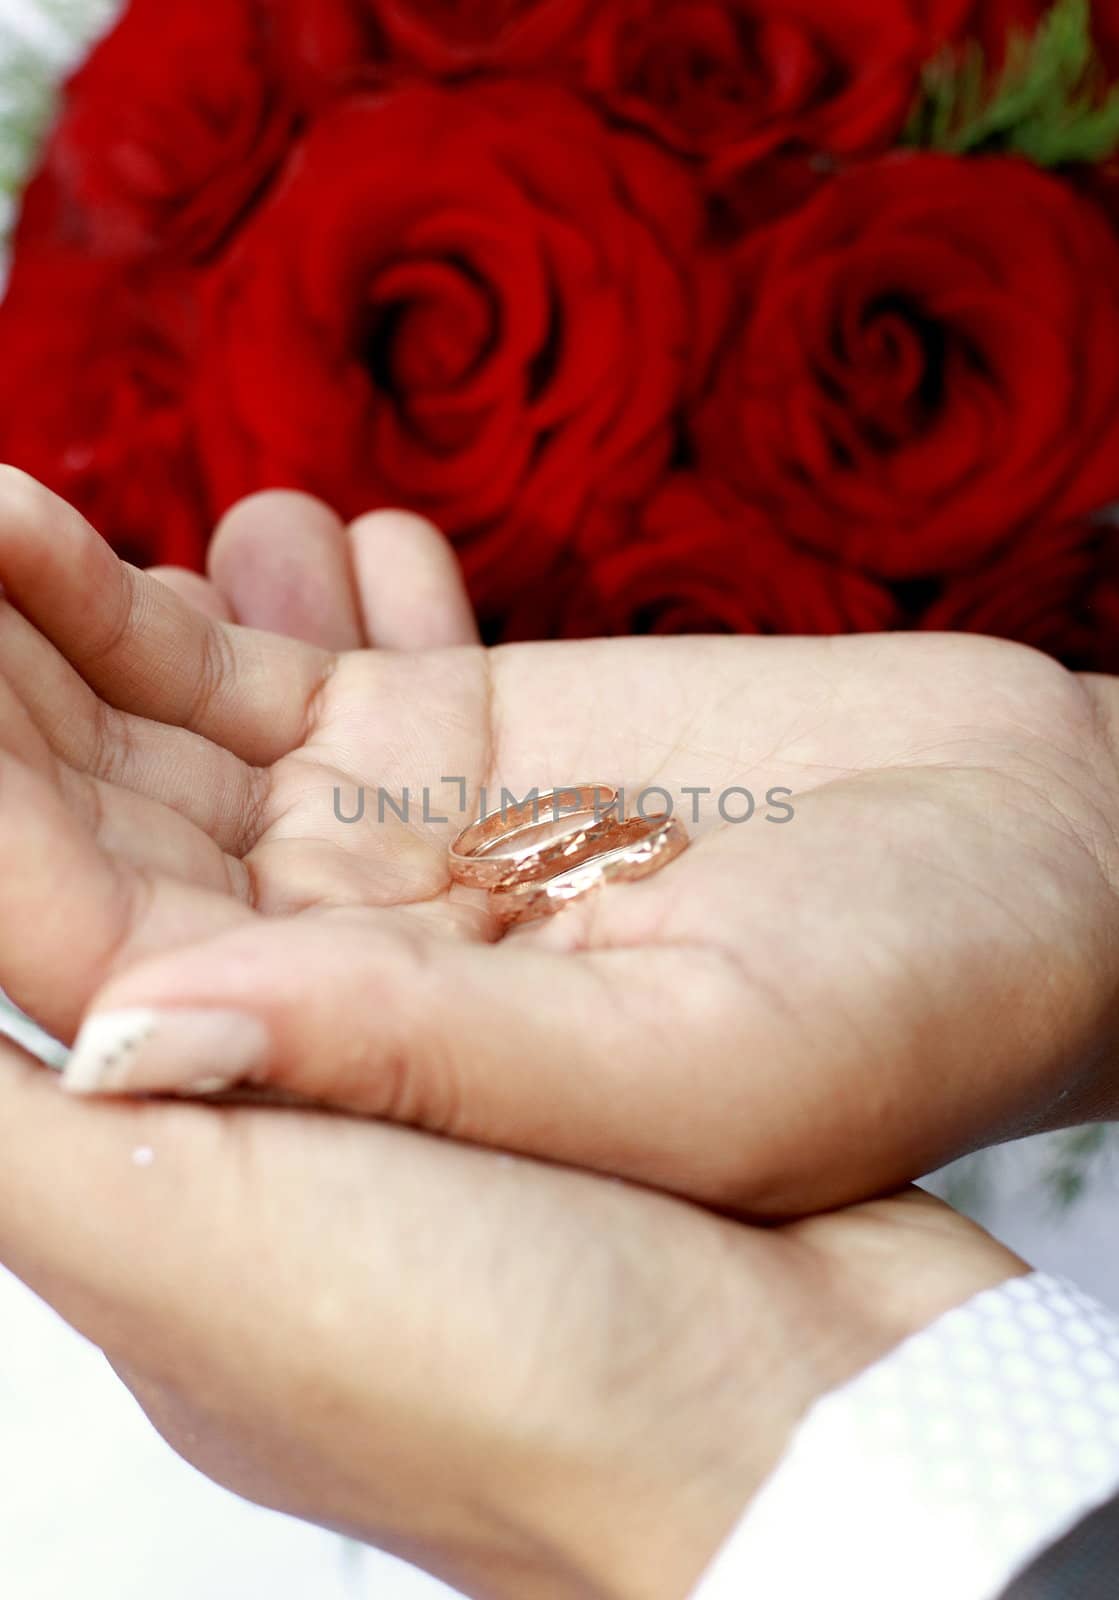 Hands of the groom and the bride with wedding rings - the newlyweds